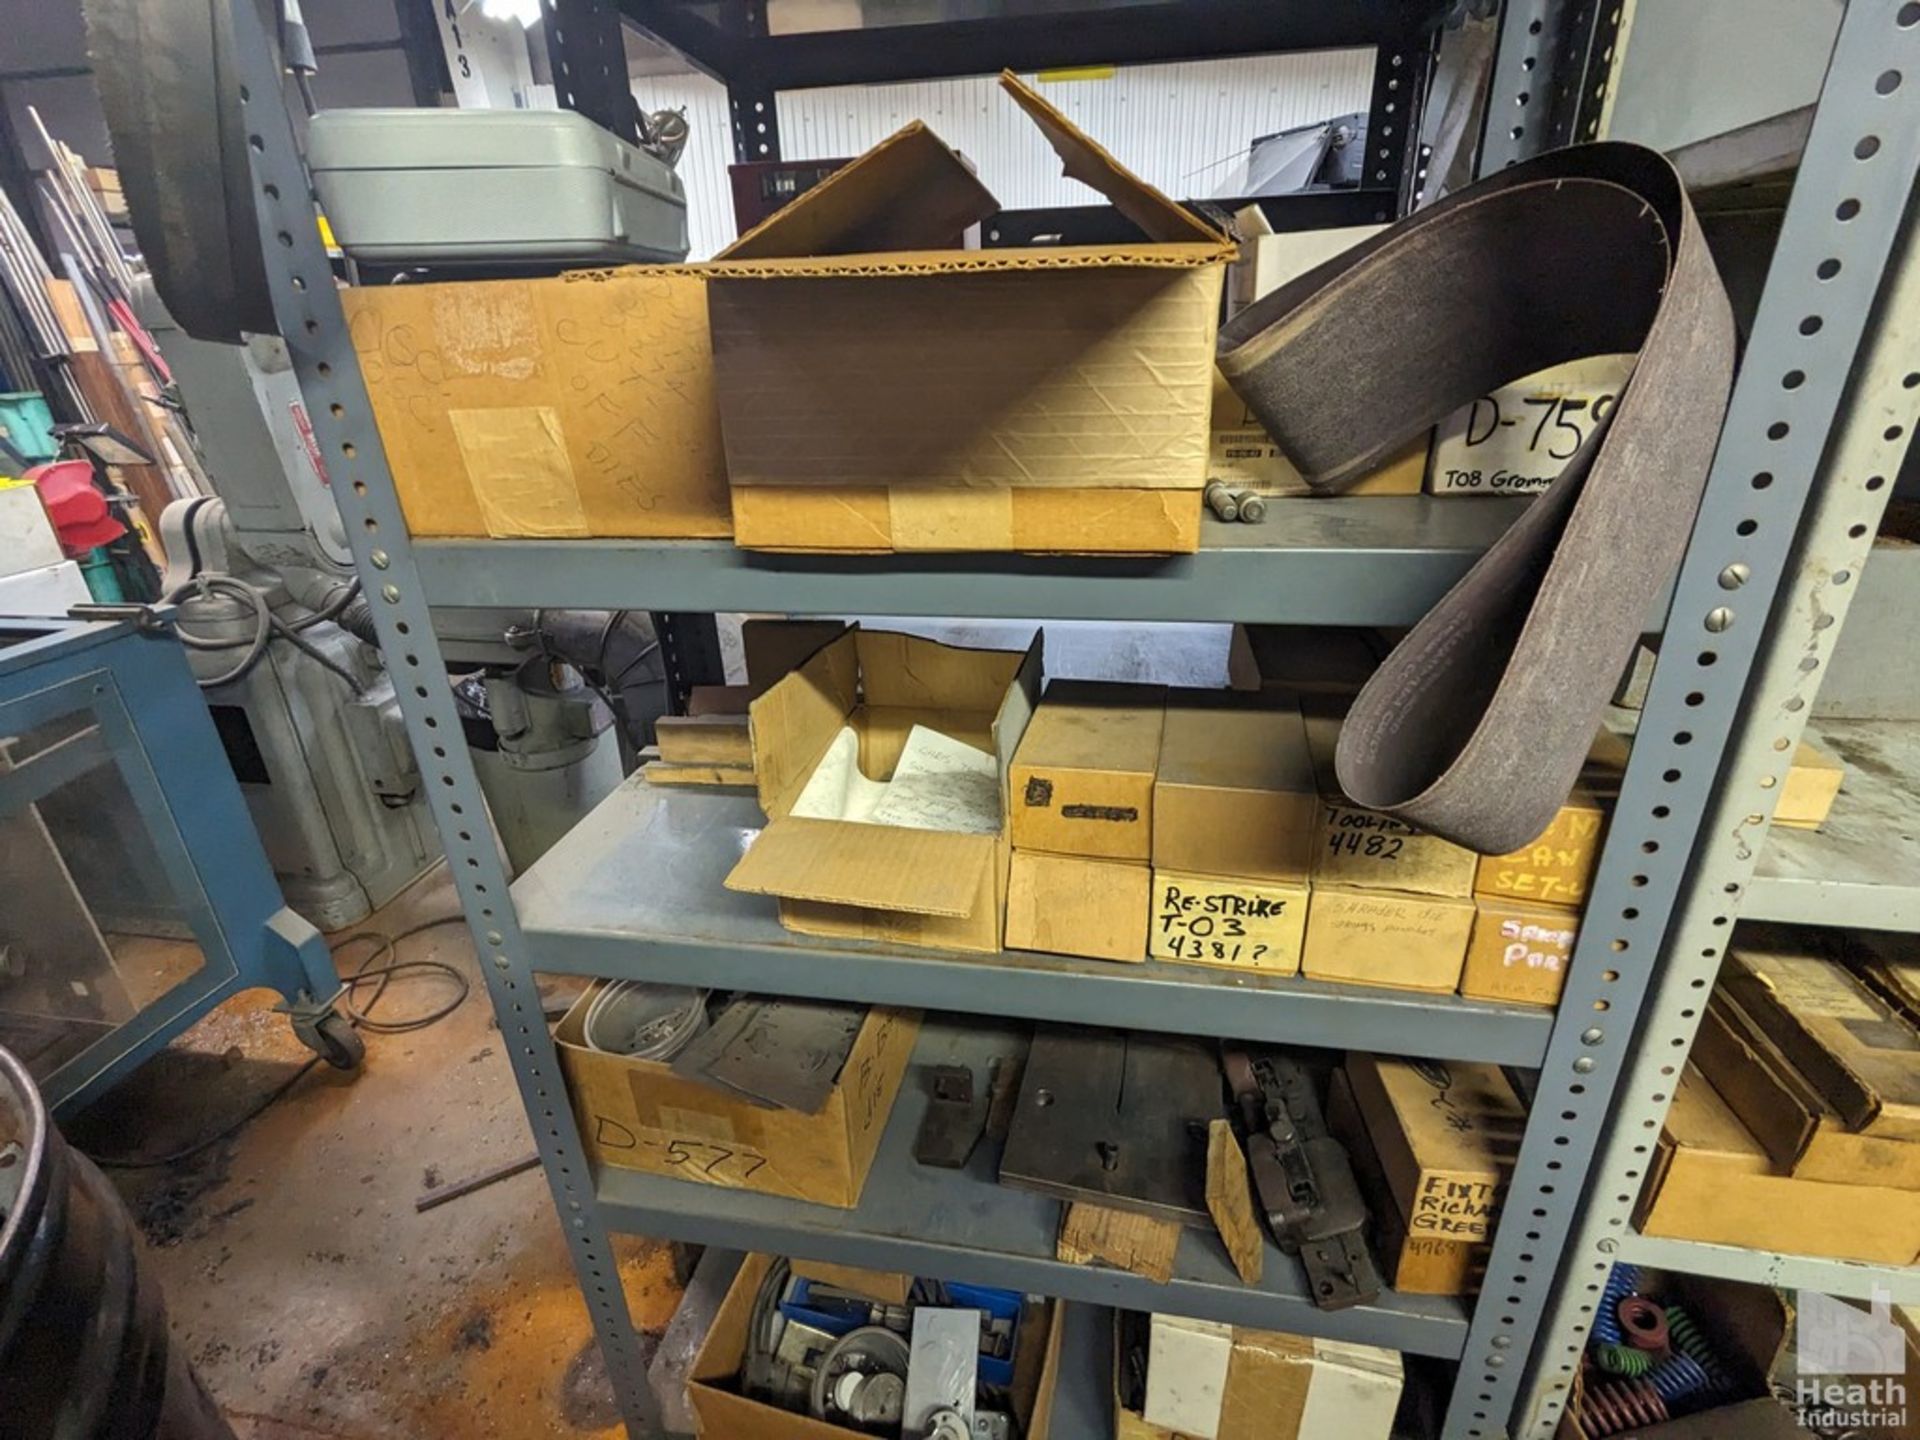 ADJUSTABLE STEEL SHELVING UNIT WITH CONTENTS, 36" X 18" X 72" - Image 4 of 5